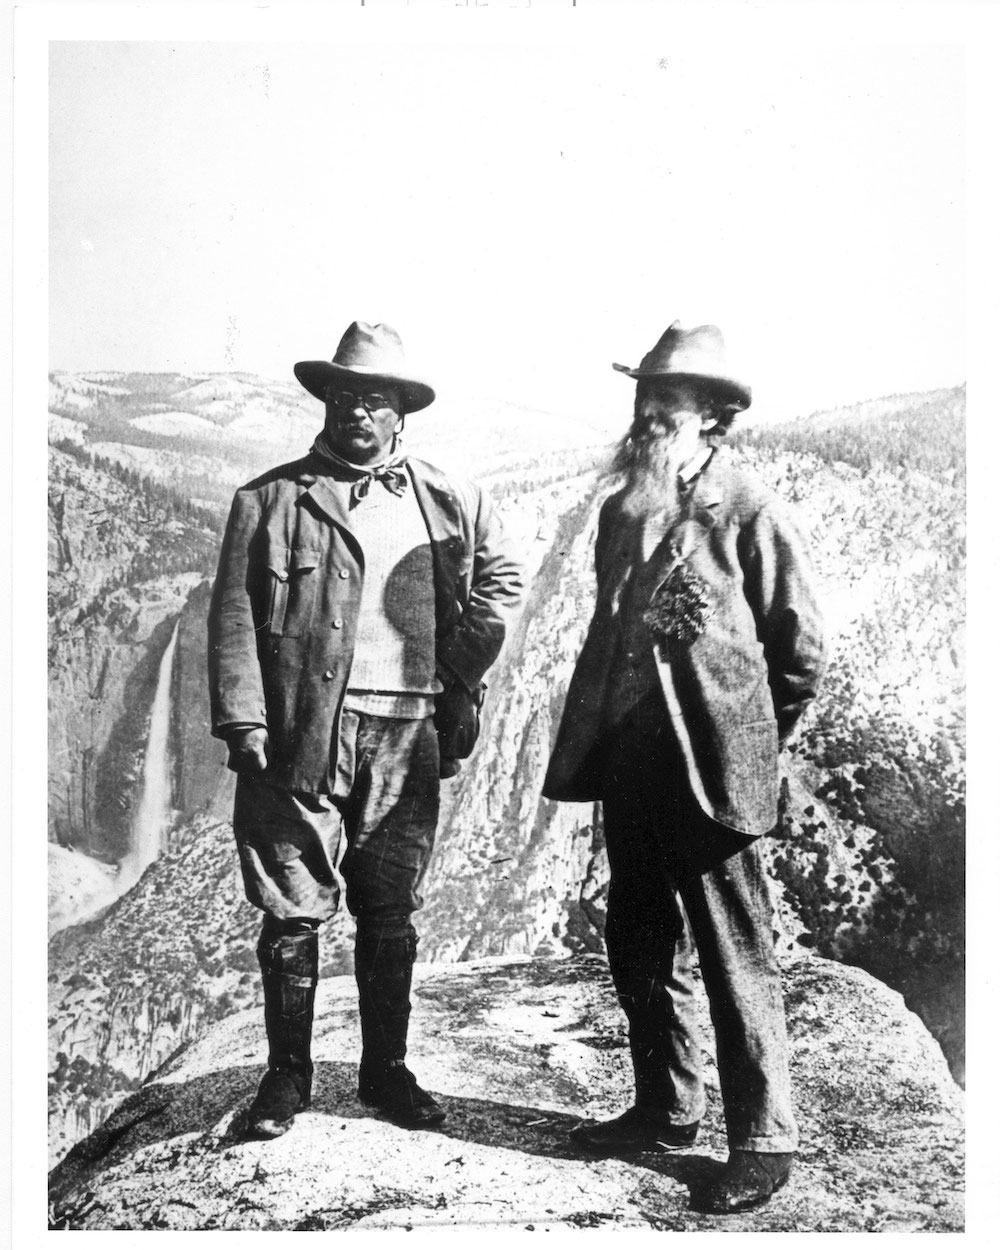 Theodore Roosevelt and John Muir stand together in Yosemite